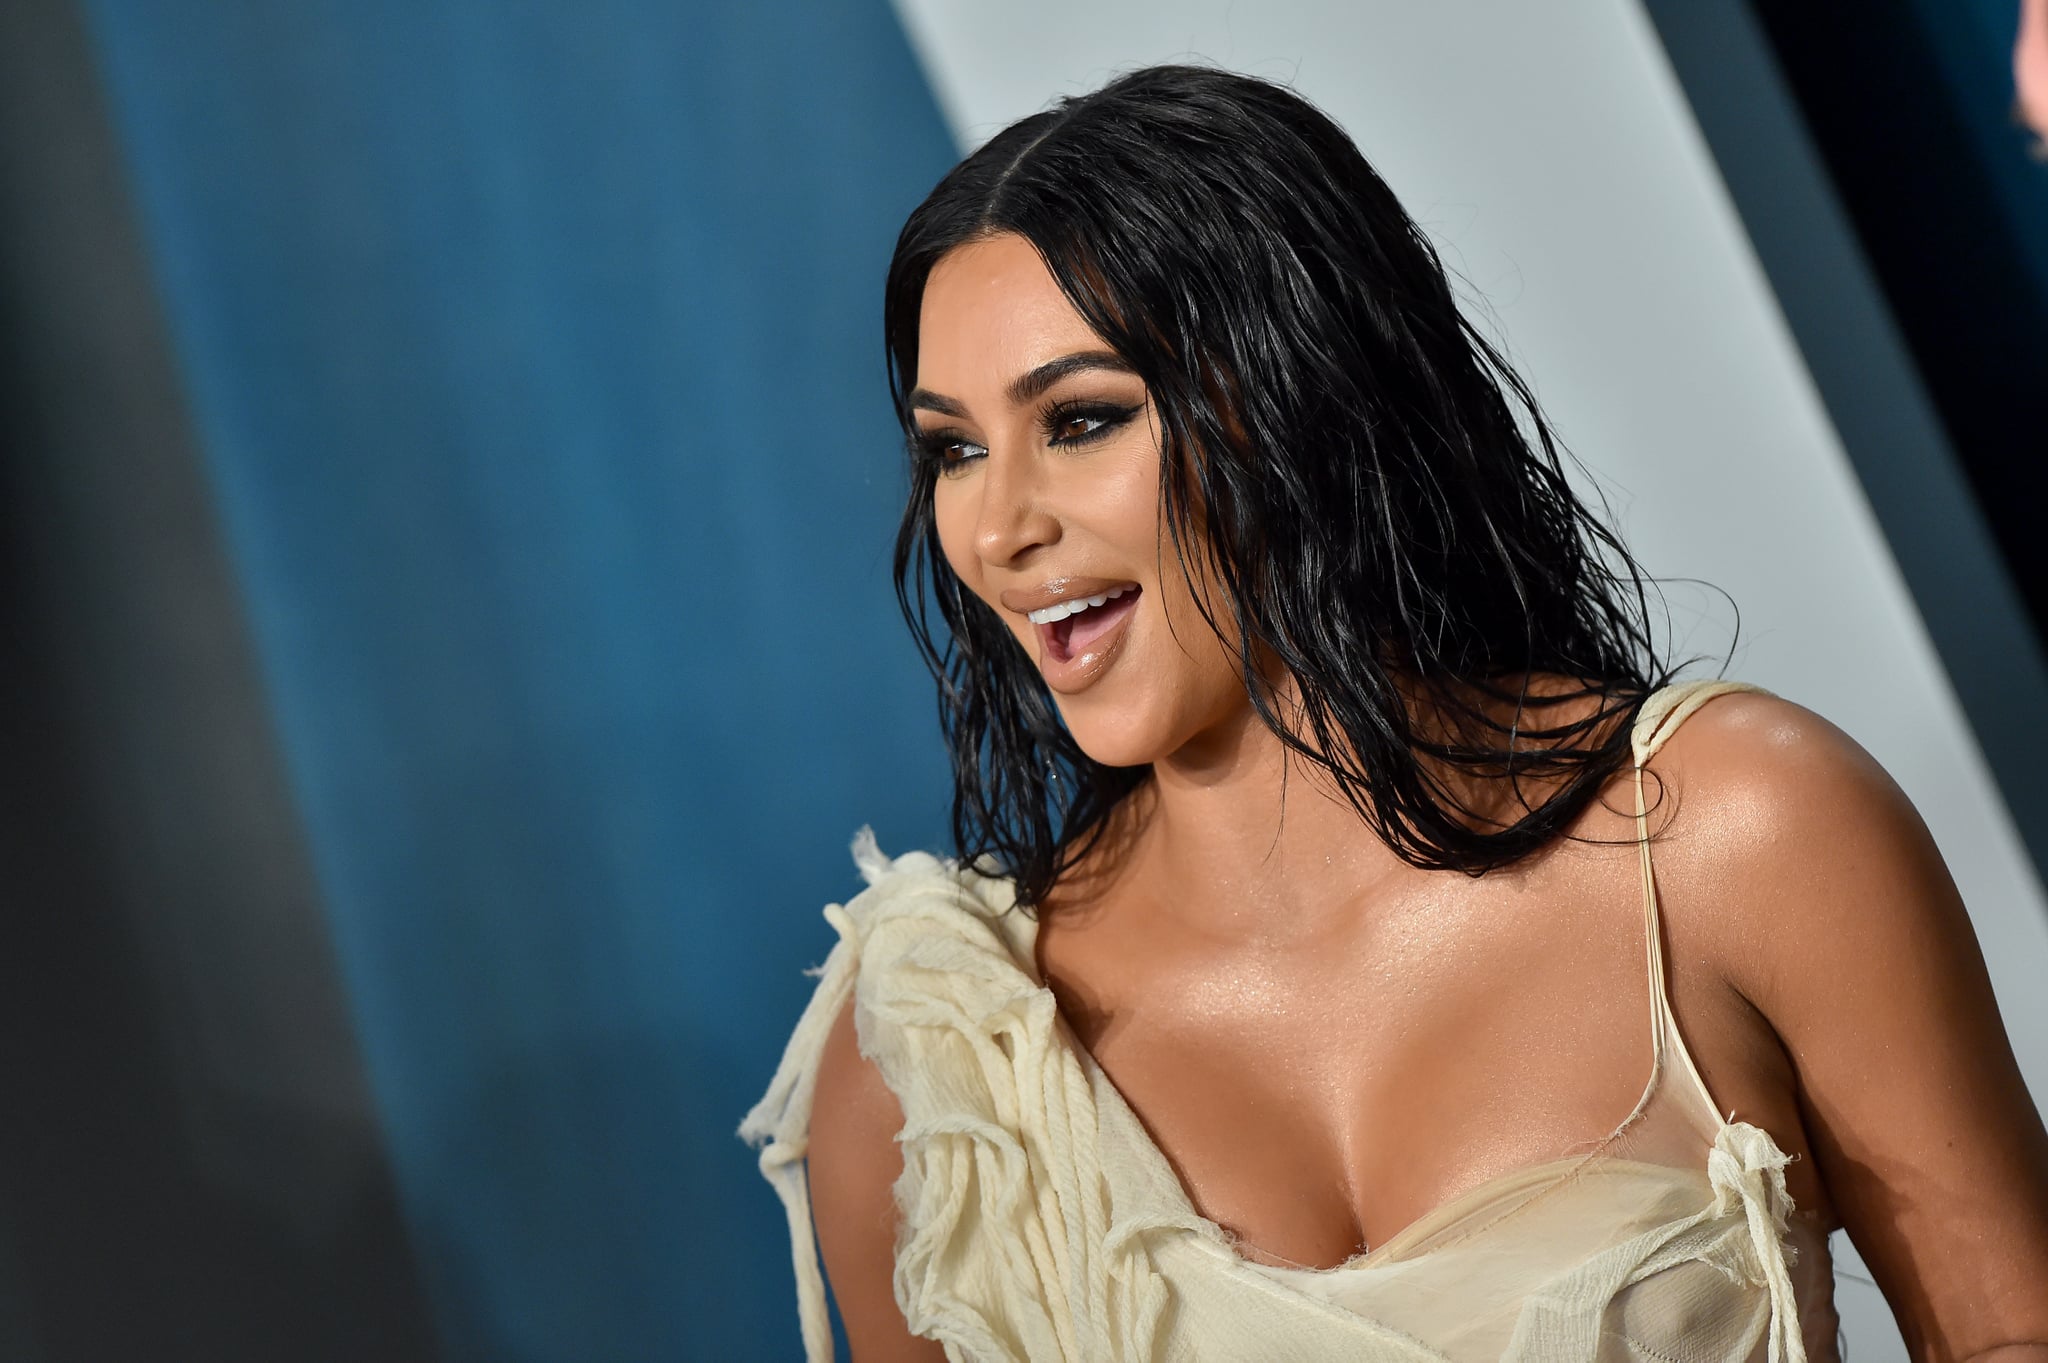 BEVERLY HILLS, CALIFORNIA - FEBRUARY 09: Kim Kardashian West attends the 2020 Vanity Fair Oscar Party hosted by Radhika Jones at Wallis Annenberg Centre for the Performing Arts on February 09, 2020 in Beverly Hills, California. (Photo by Axelle/Bauer-Griffin/FilmMagic)